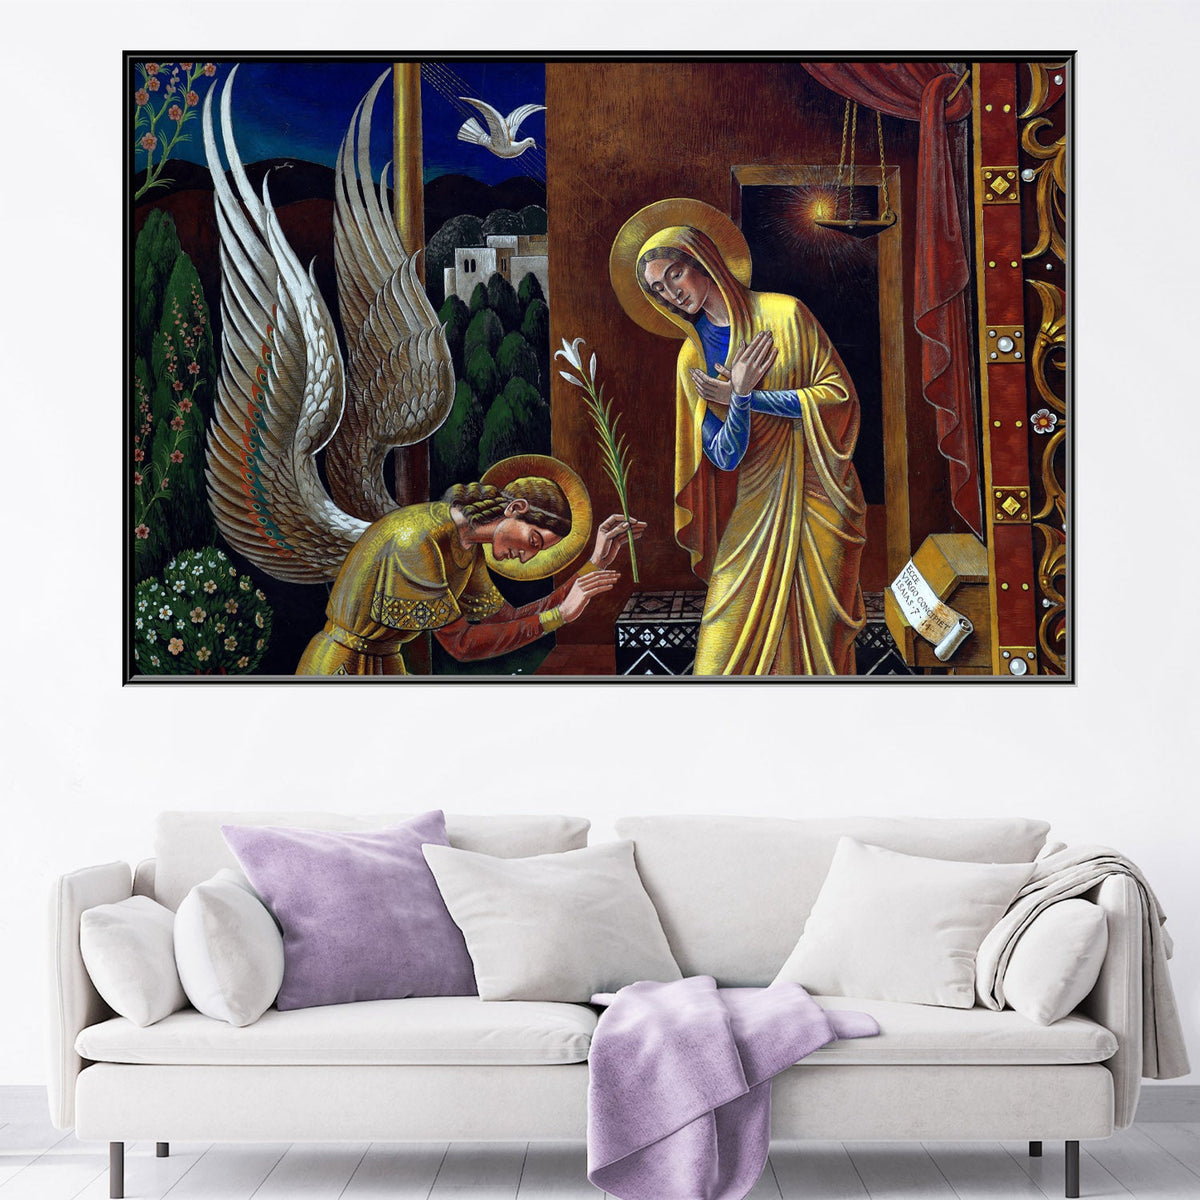 https://cdn.shopify.com/s/files/1/0387/9986/8044/products/TheAnnunciationofMaryCanvasArtprintFloatingFrame-1.jpg